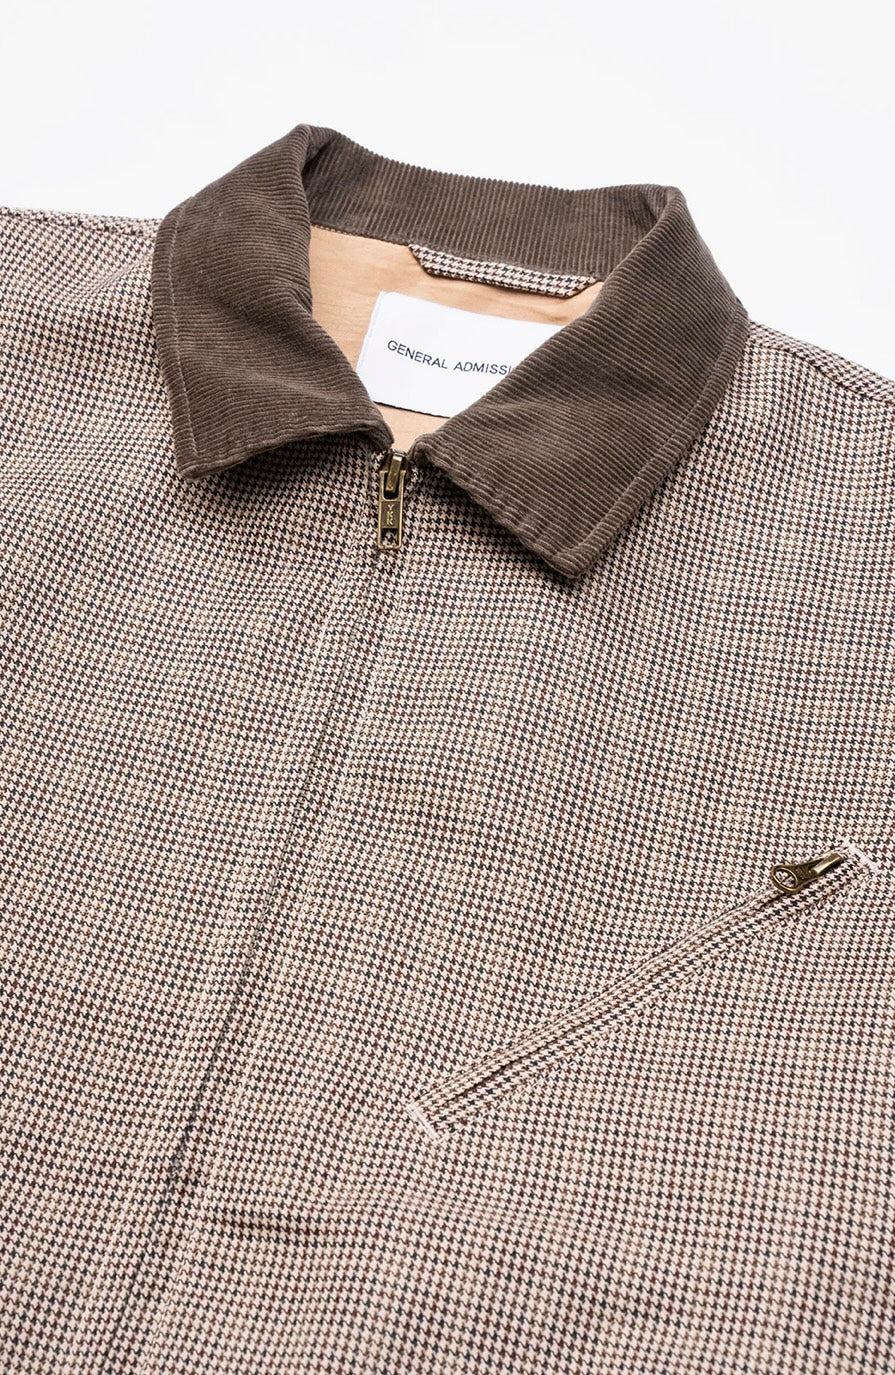 General Admission - GENERAL ADMISSION PLAID JACKET IN BEIGE CHECK - Rent With Thred